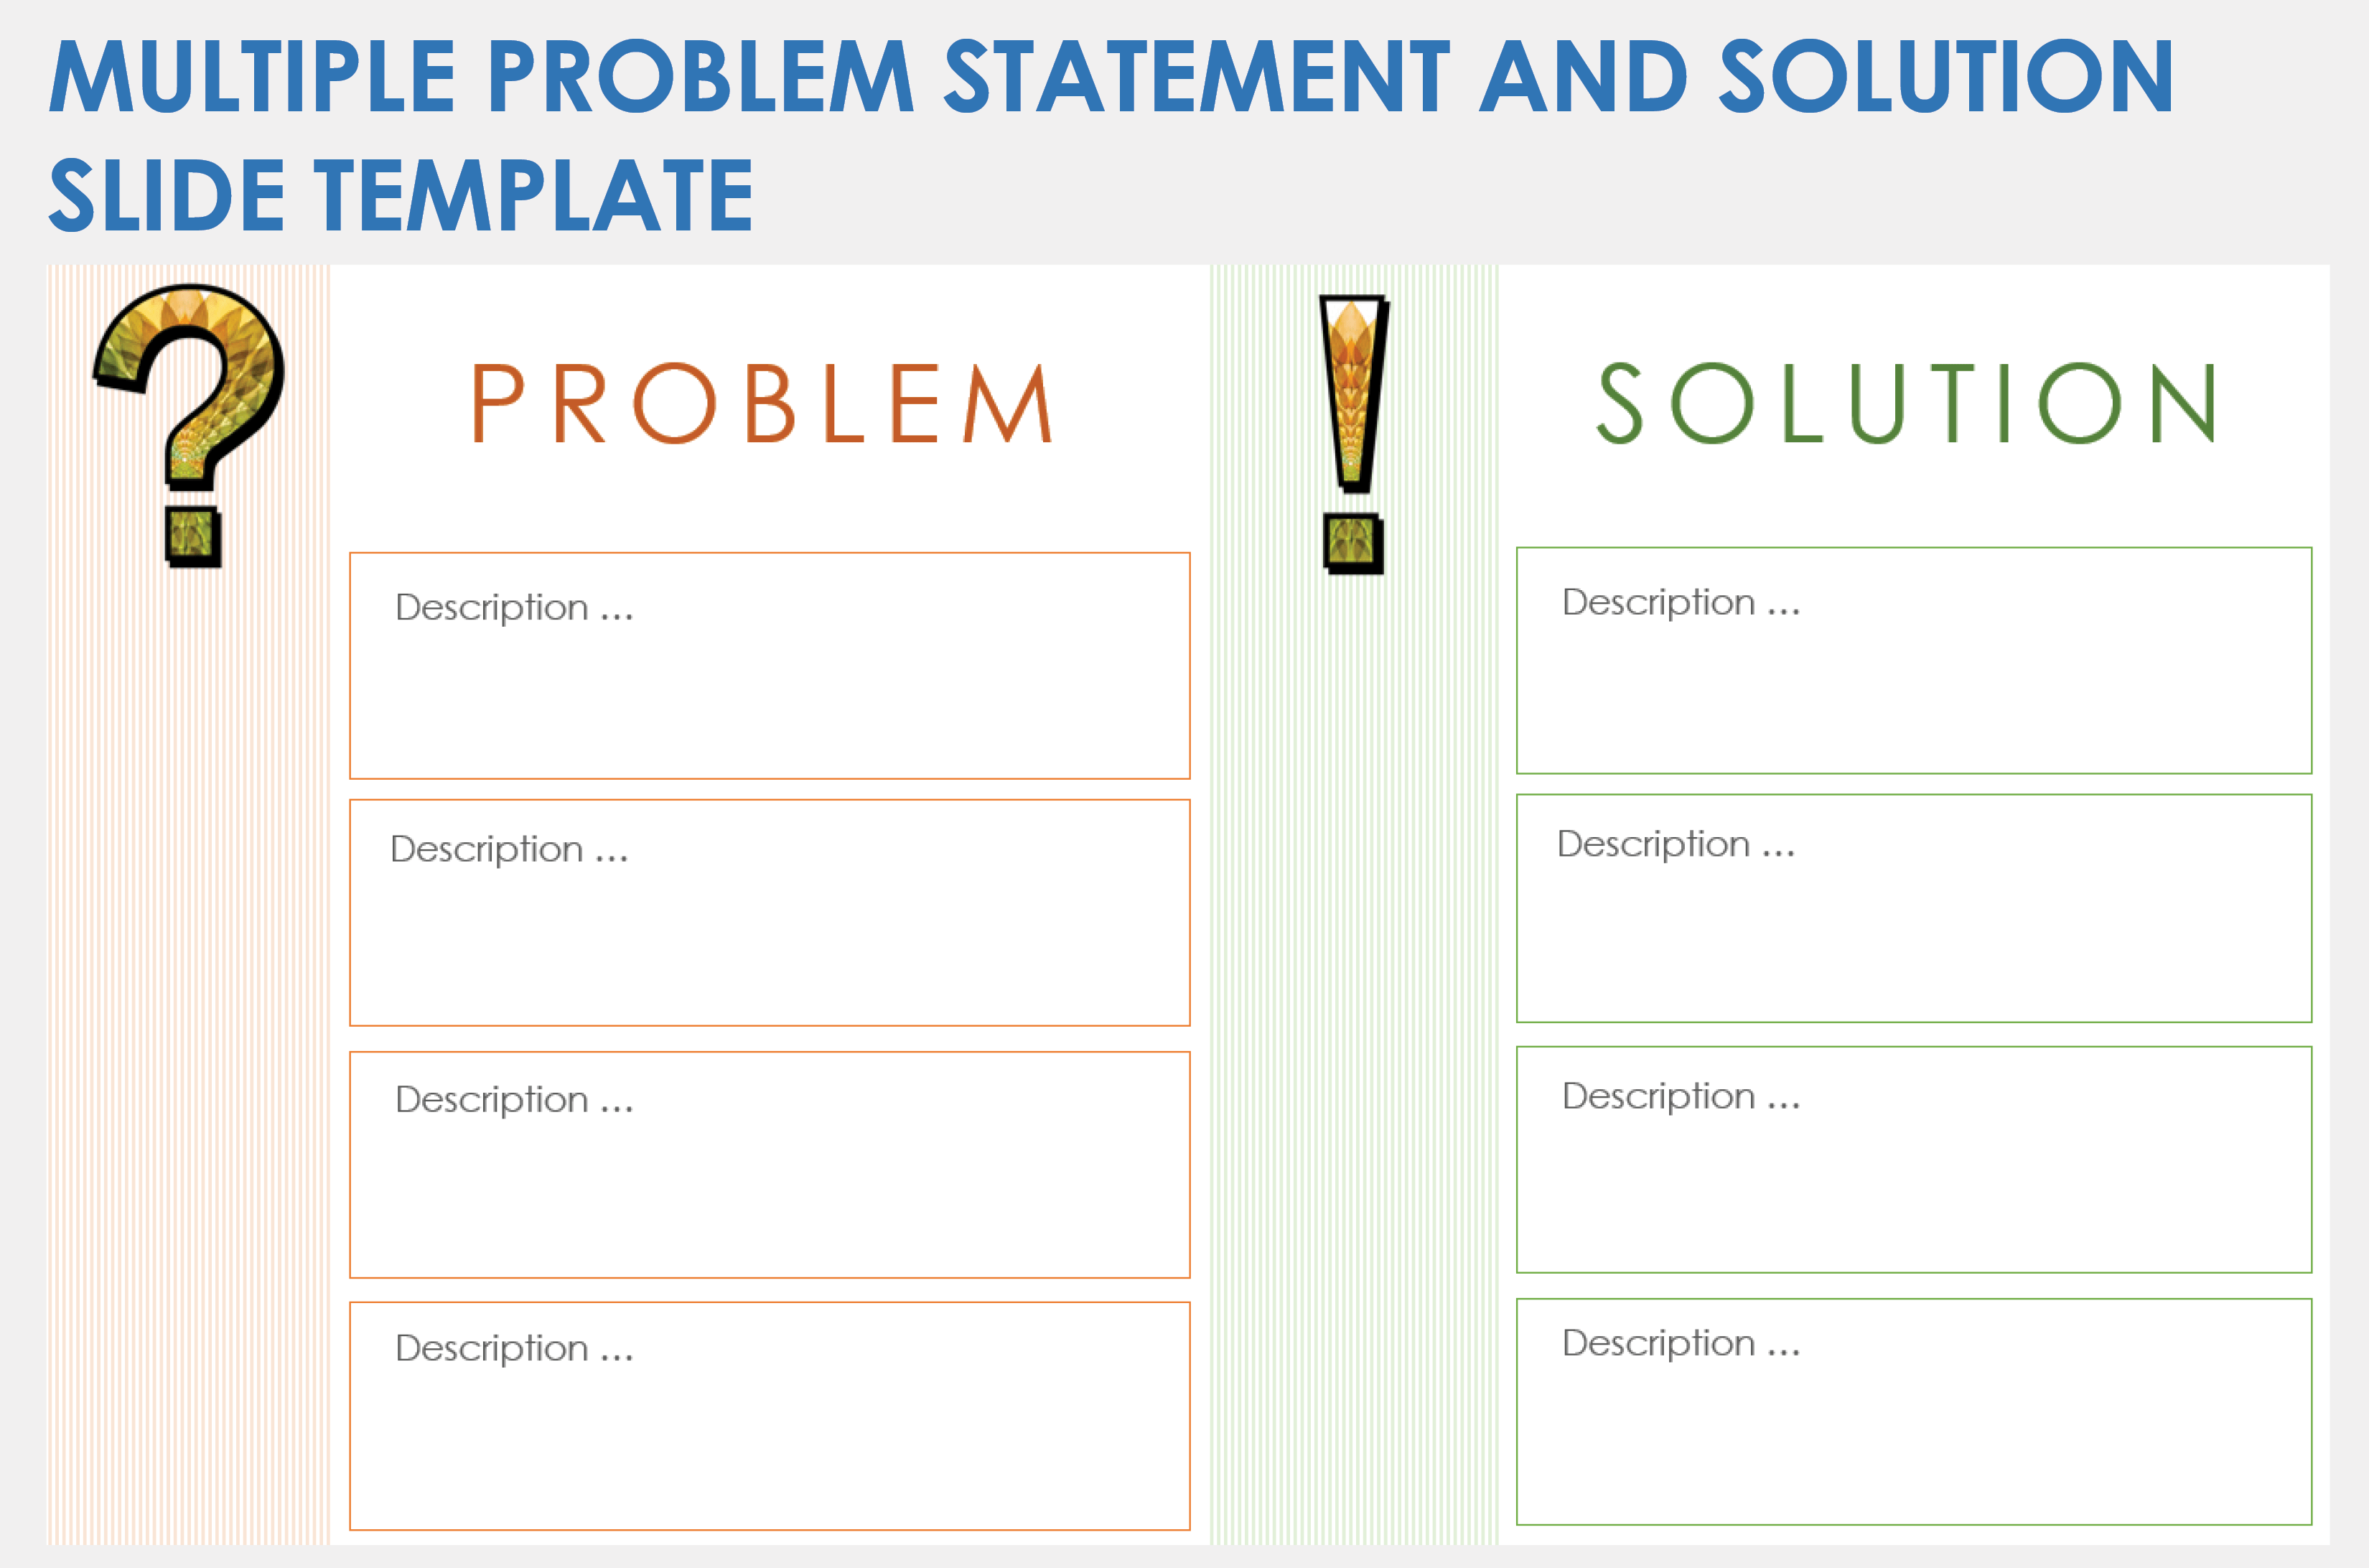 Multiple-Problem Statement and Solution Slide Template